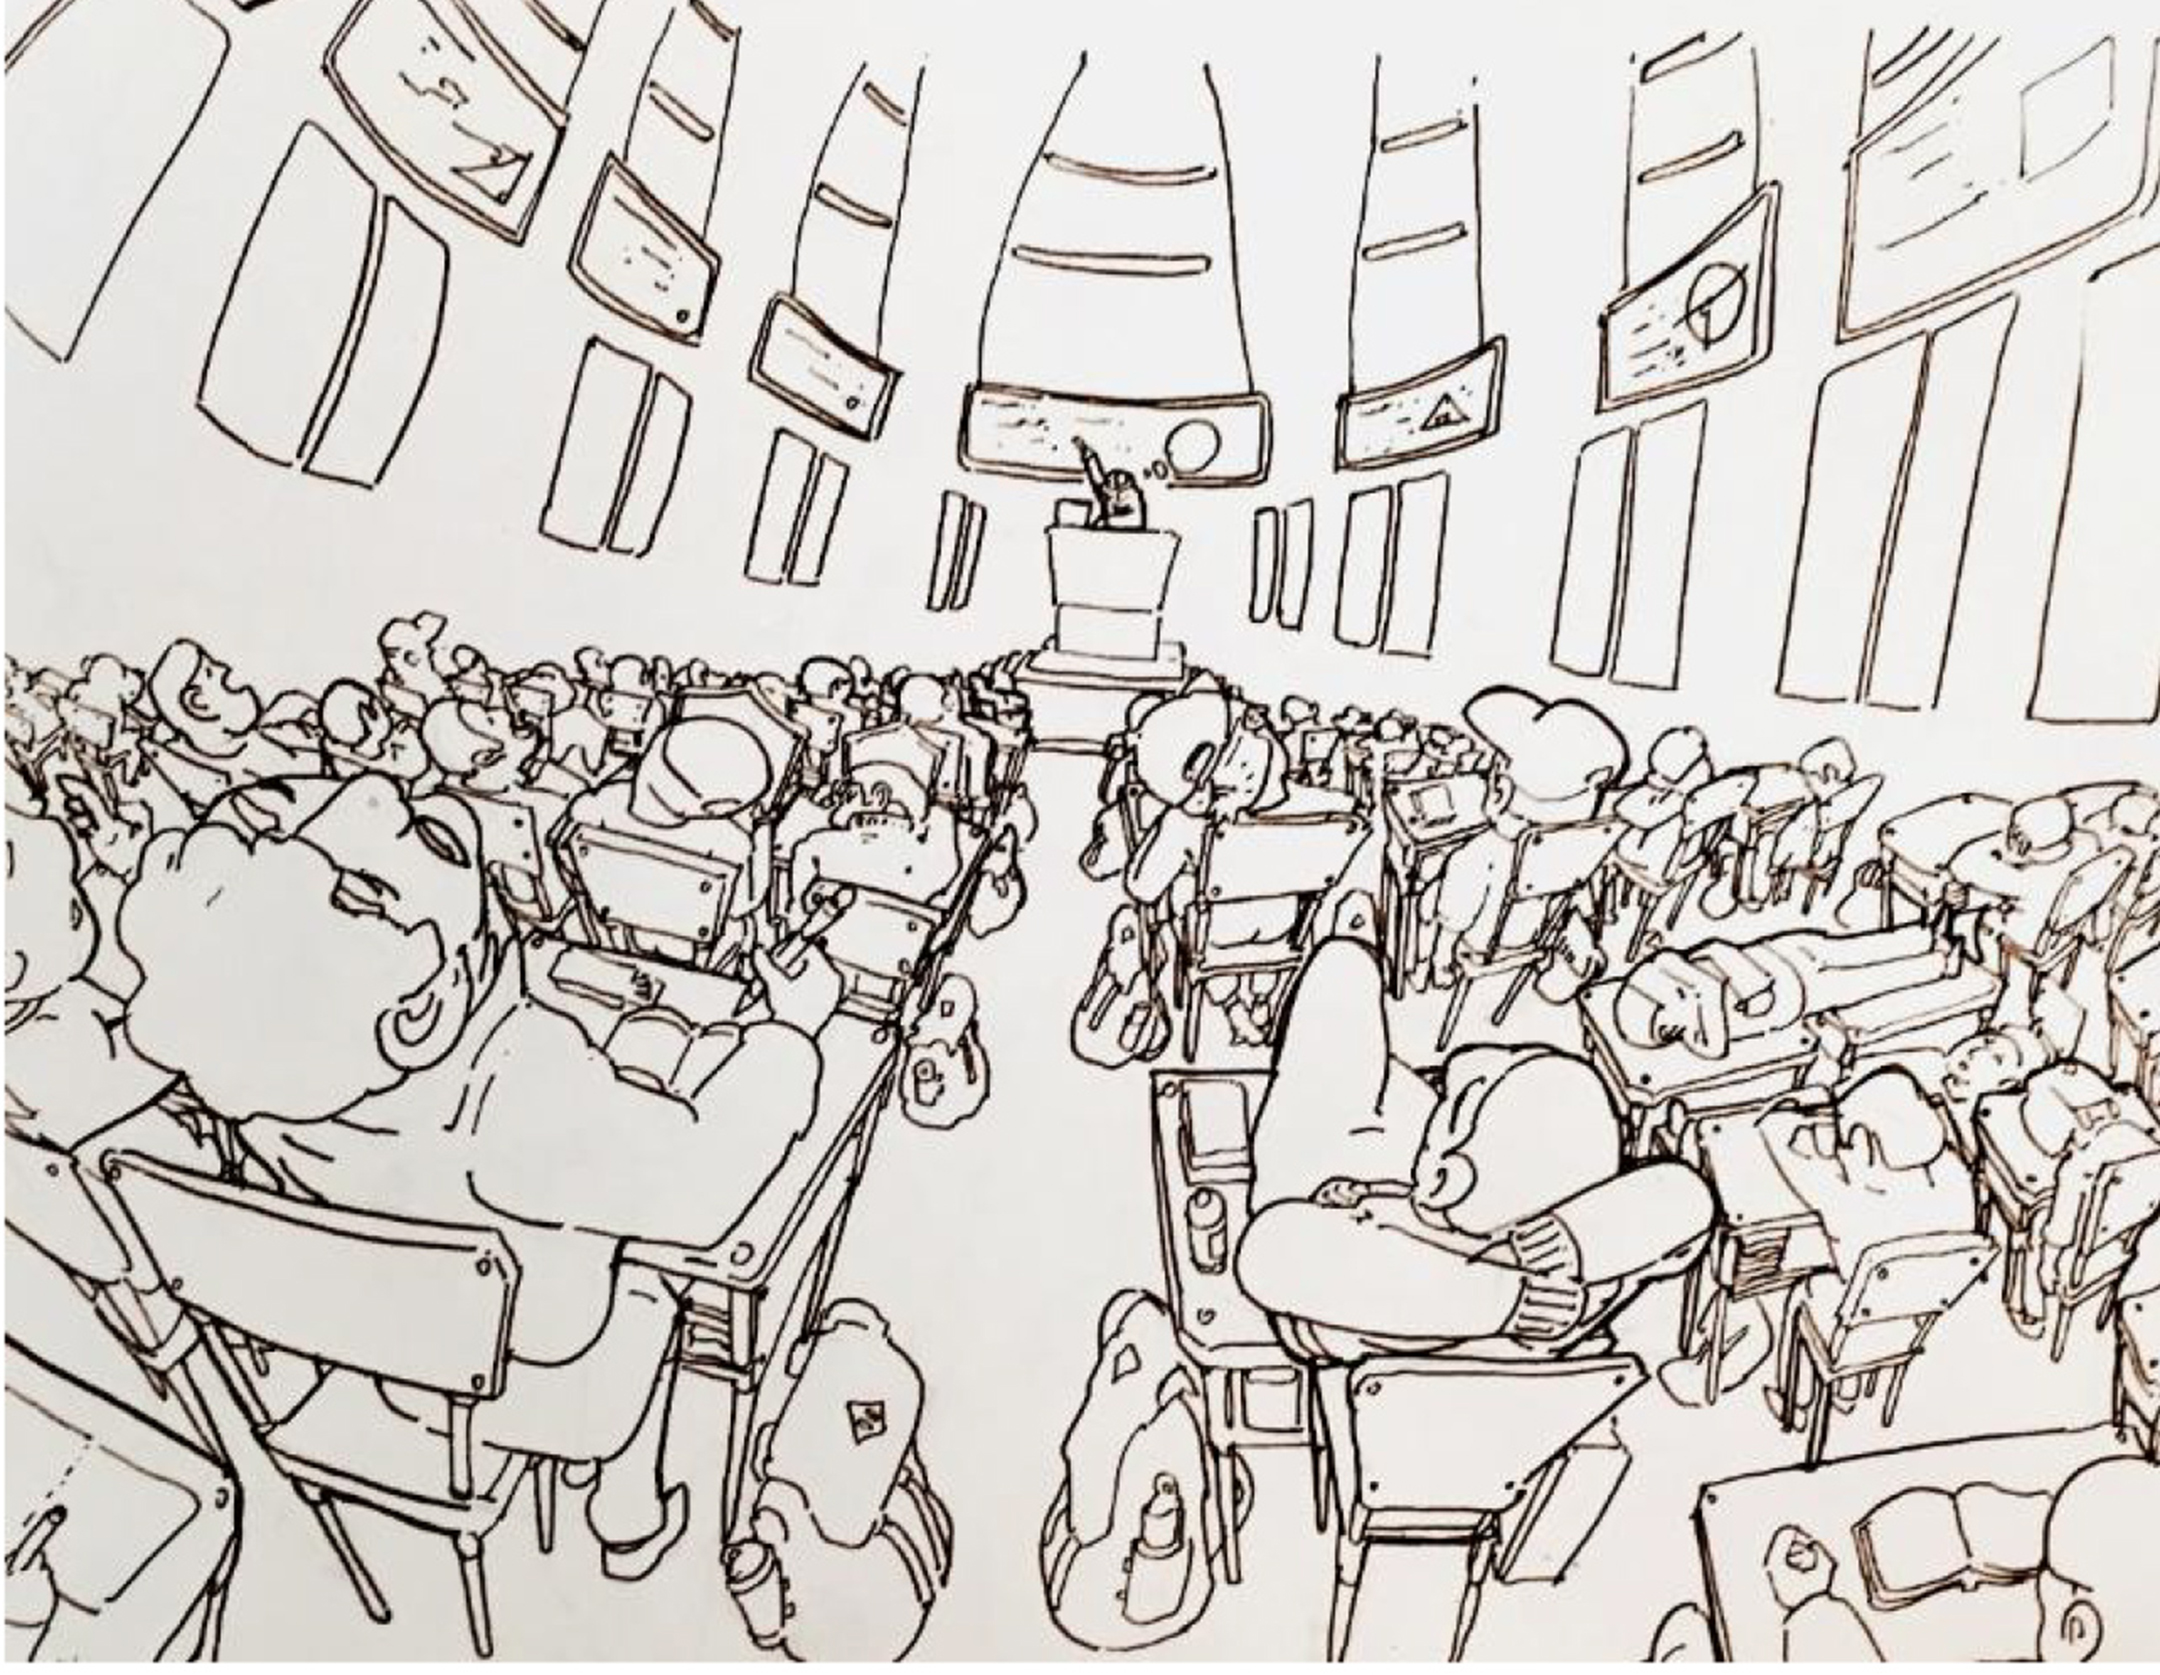 Black and white drawing of a large classroom full of students at desks seen from the back of the room